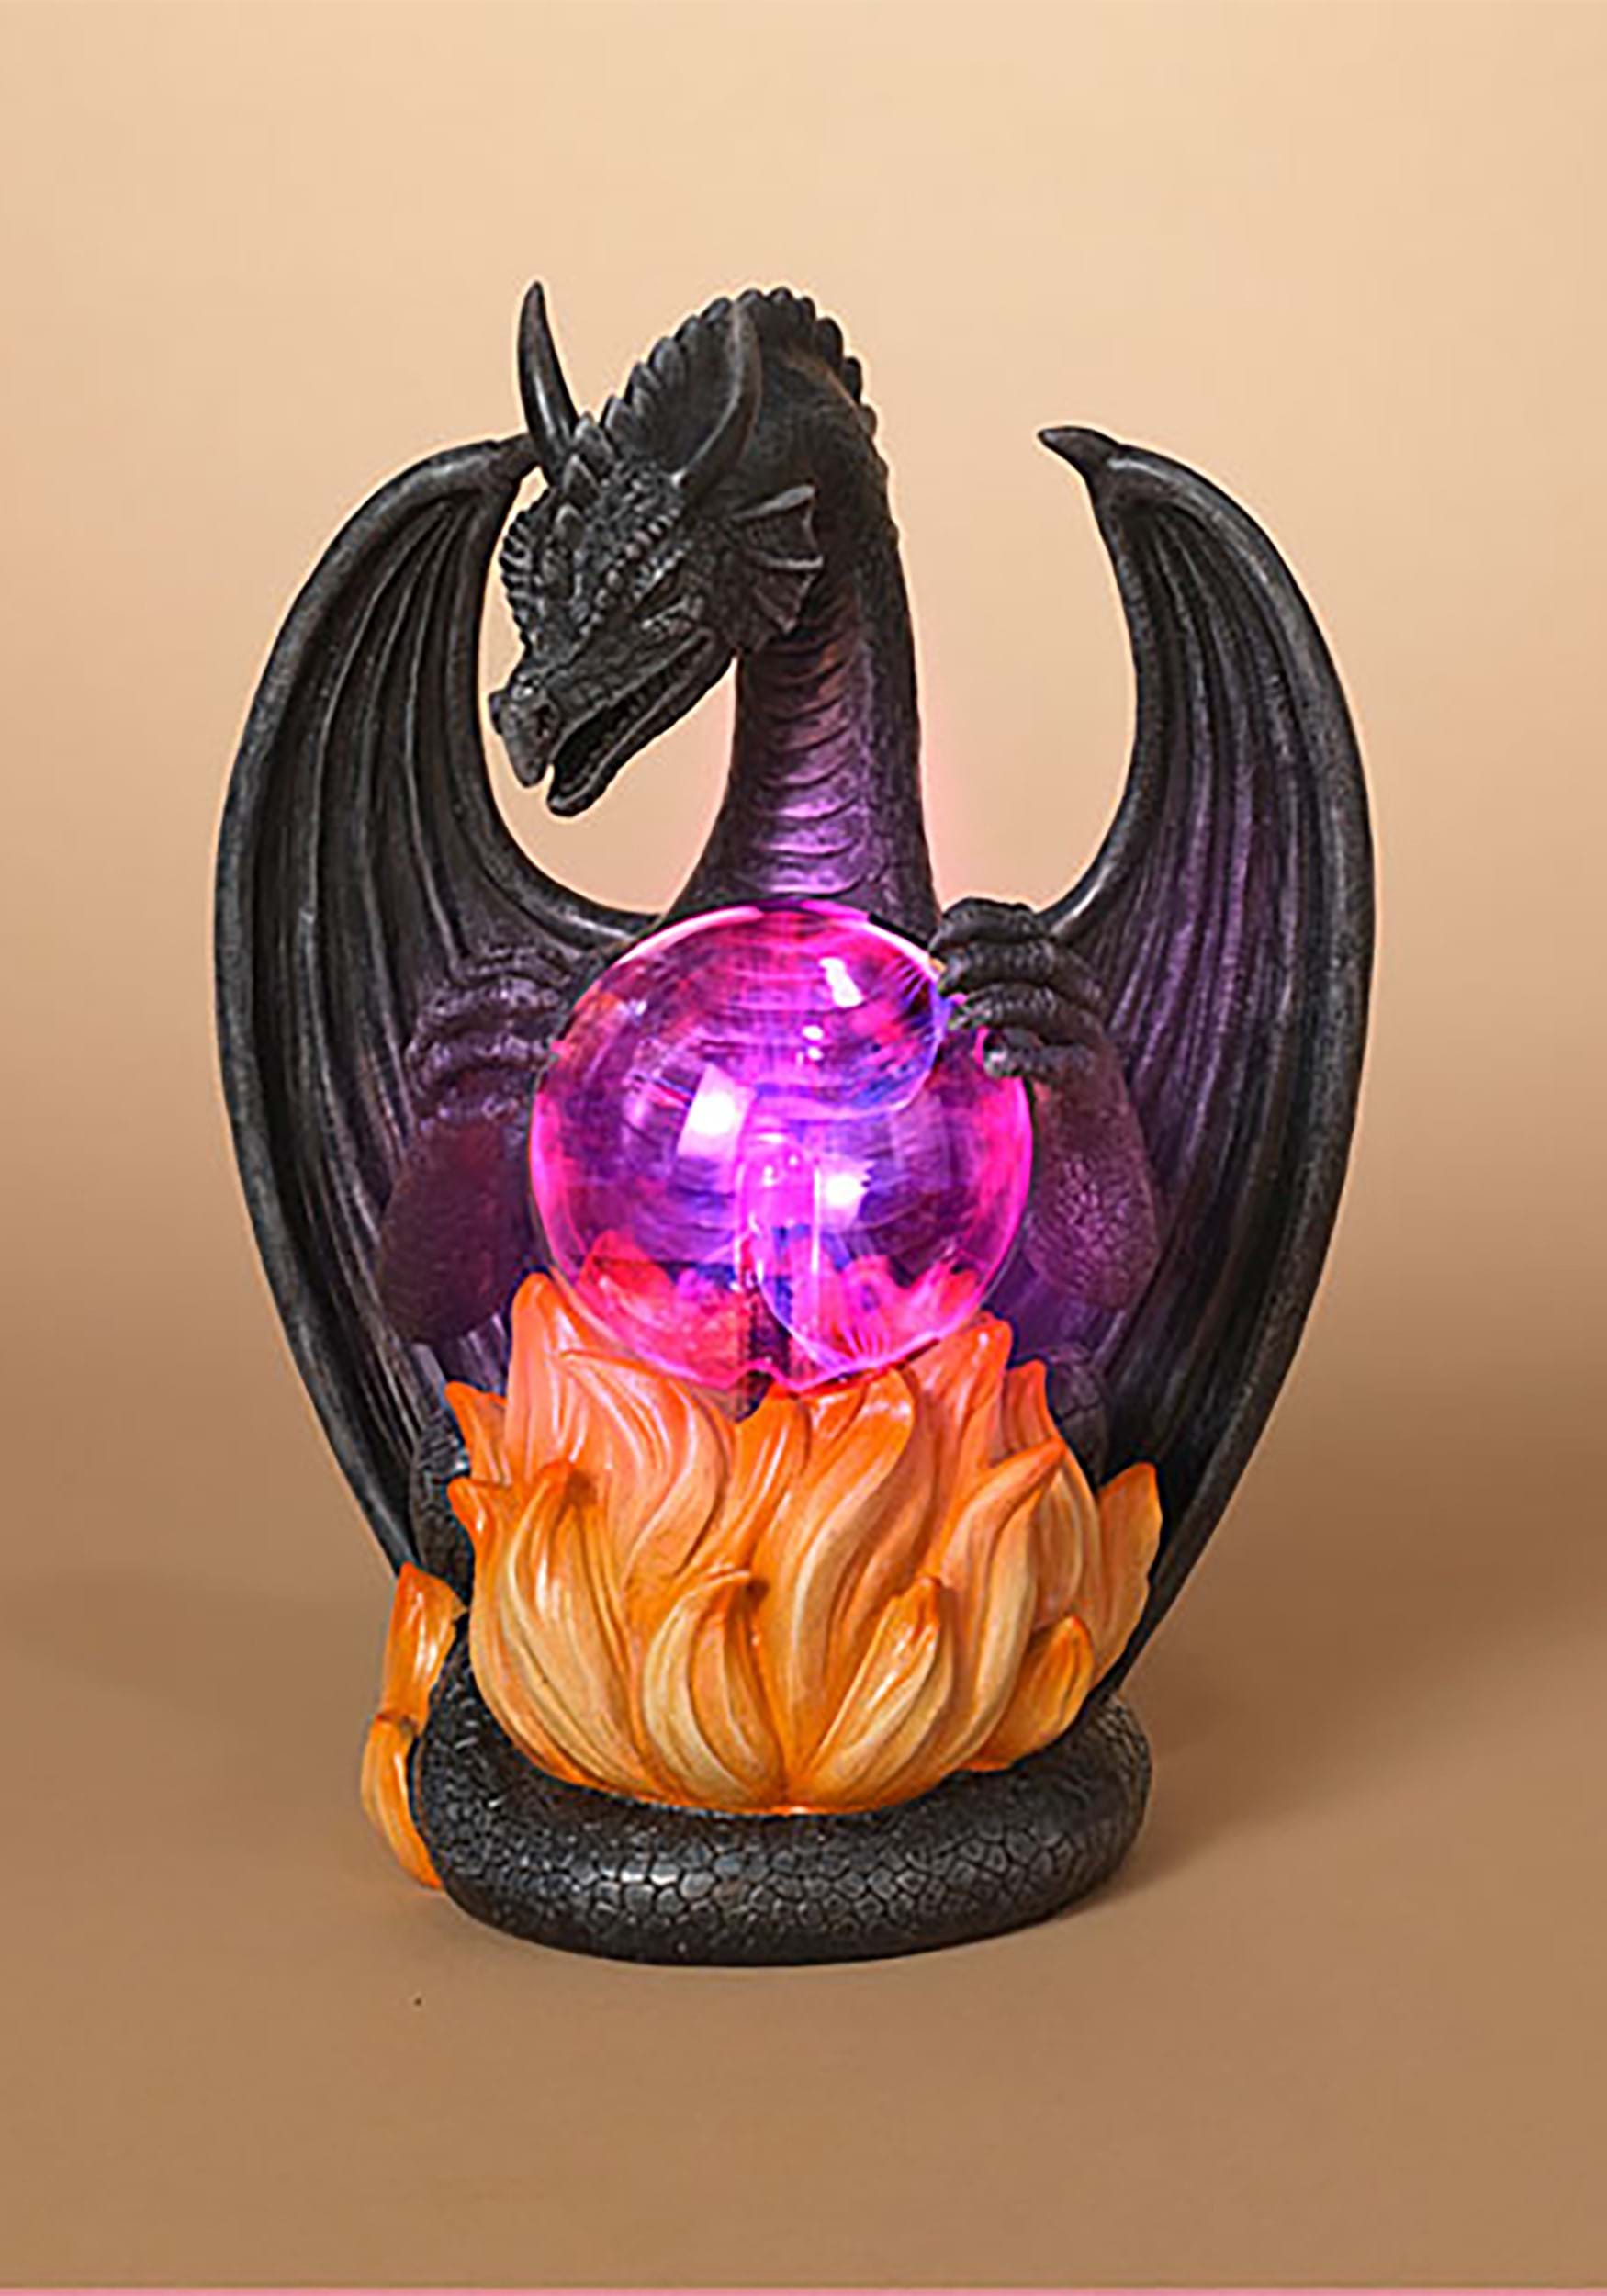 10″ Dragon with Lighted Static Magic Ball Prop